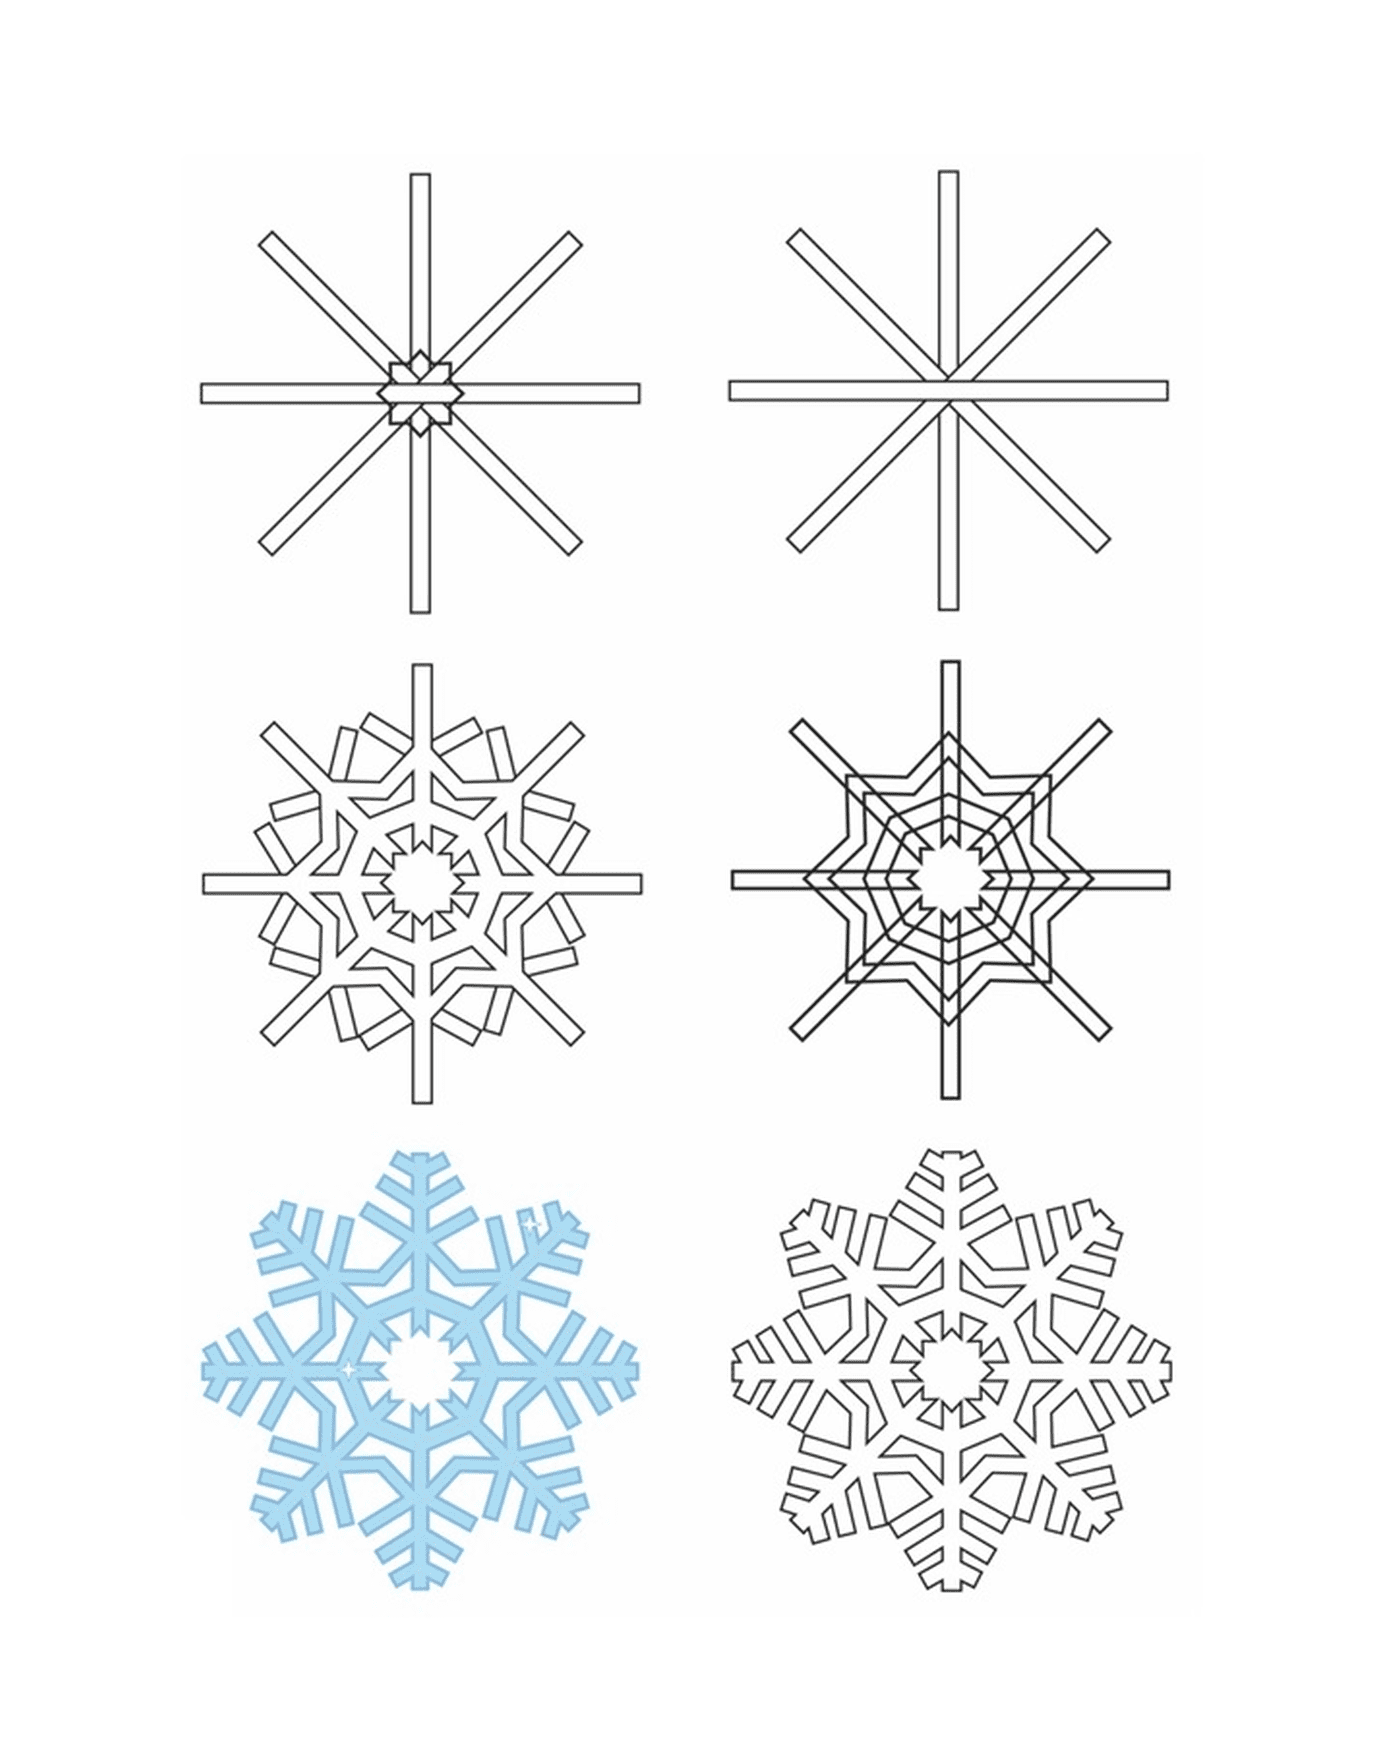  How to draw a flake 